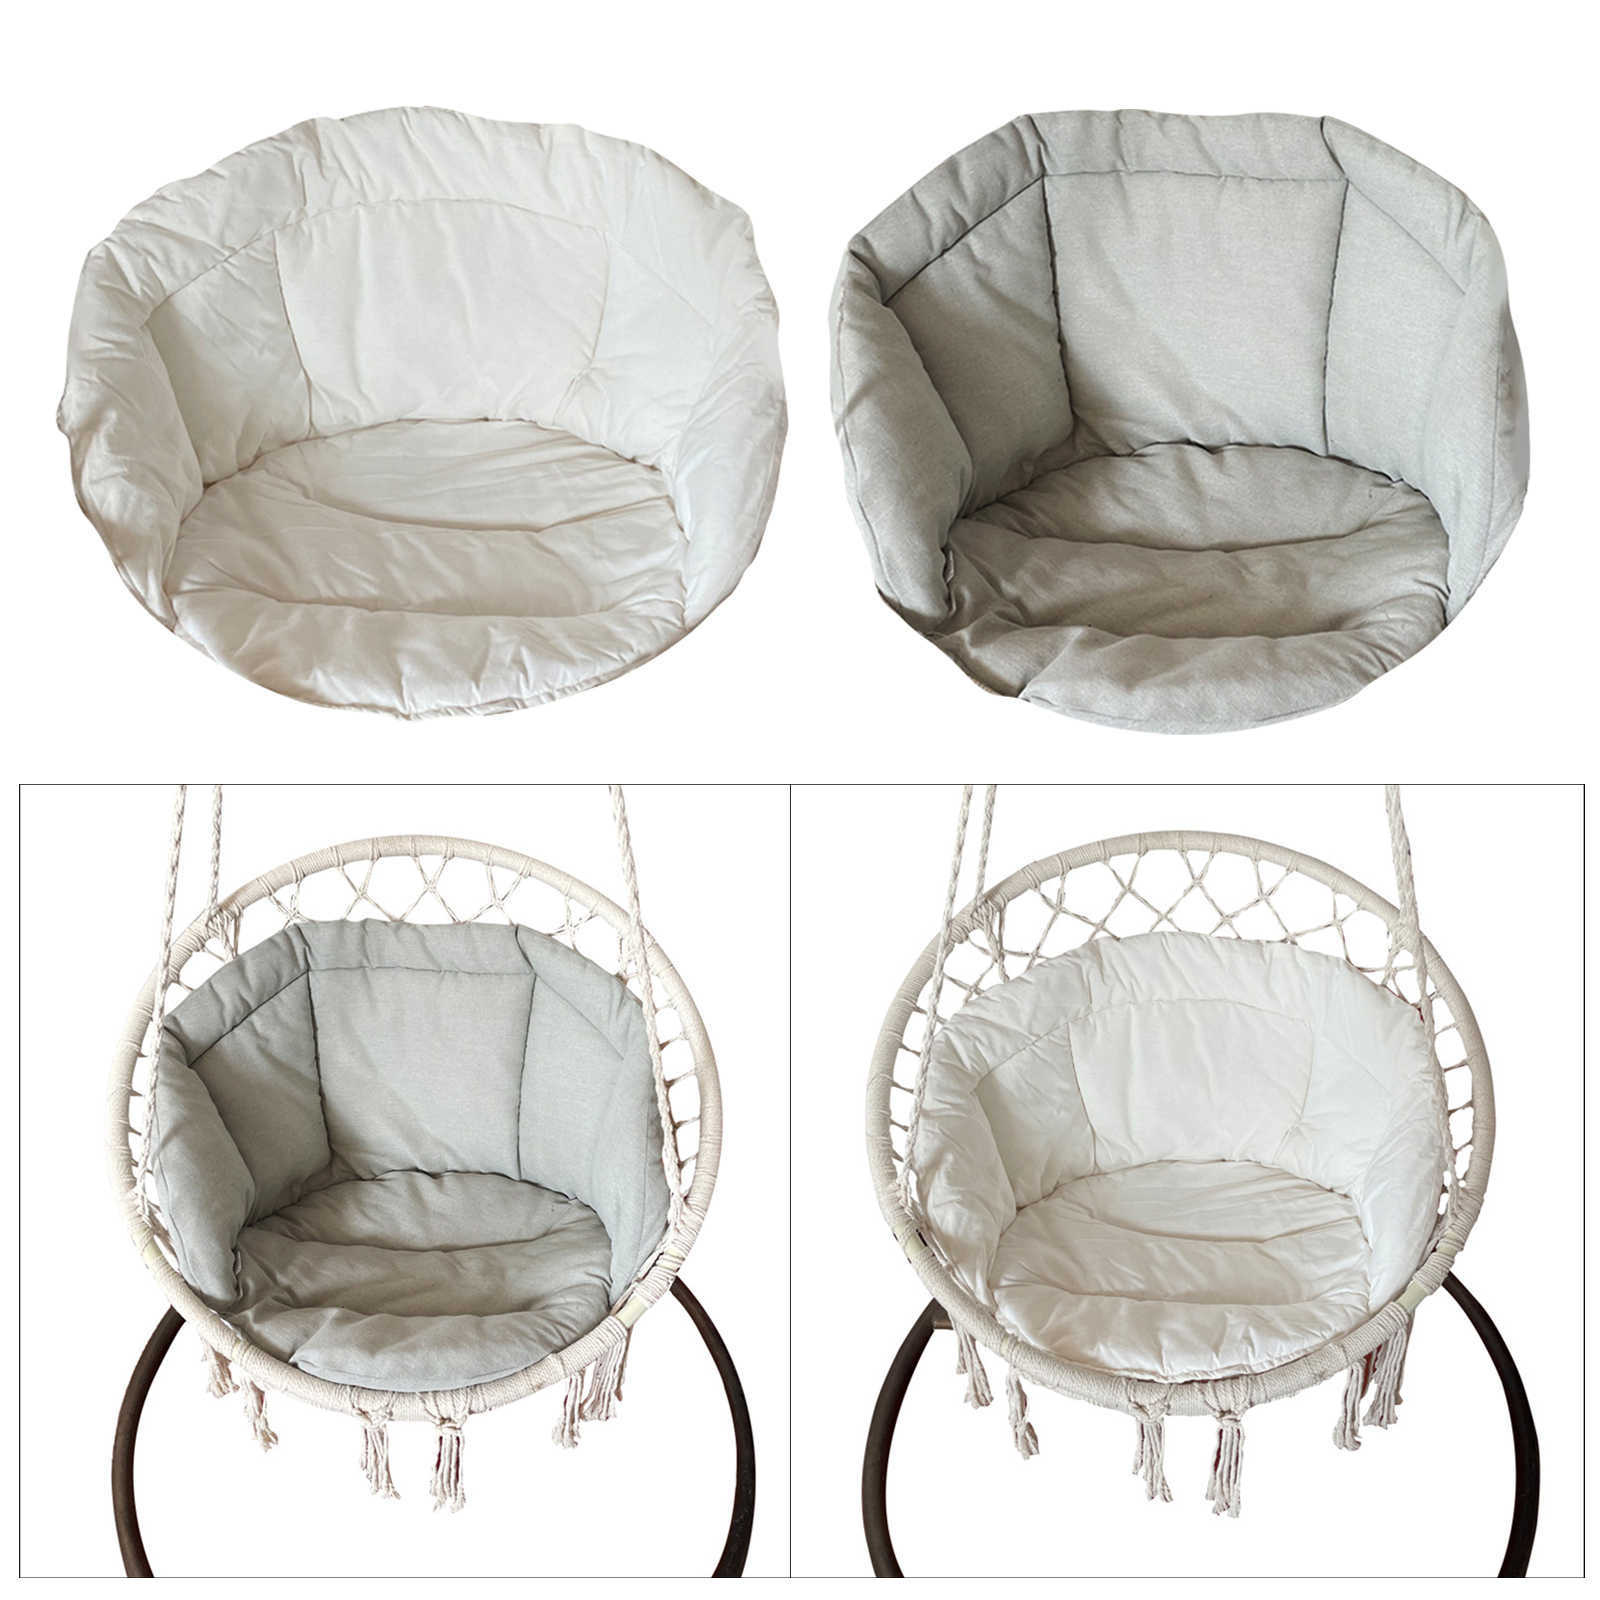 Swing Chair Seat Cushion Garden Hammock Cradle Pads for Patio er Tear Drop Hanging Chair Indoor Outdoor Home Bedroom Cover